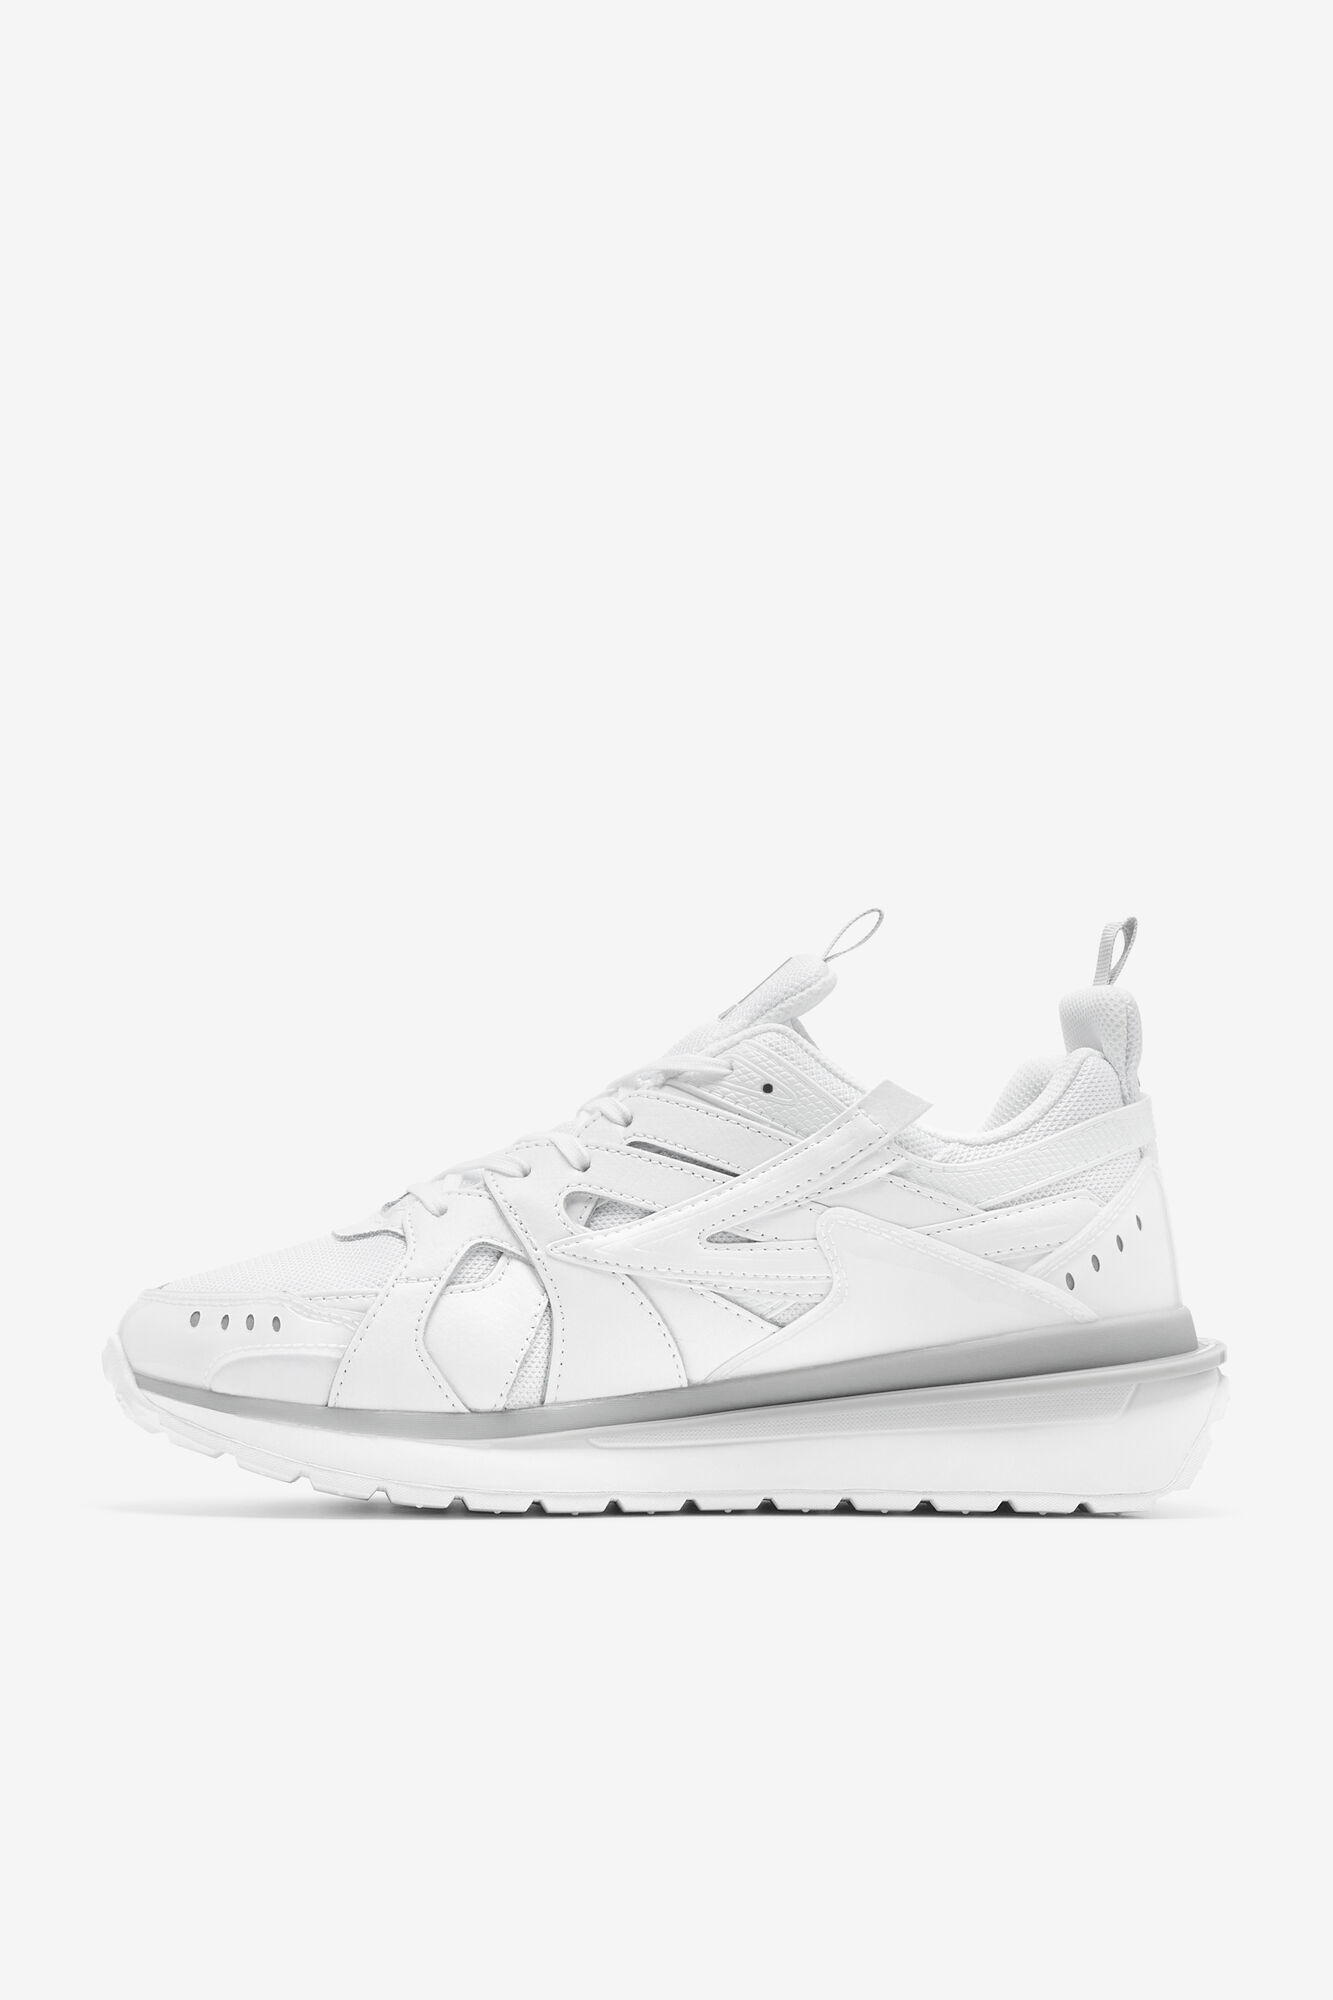 Sandenal Patched Men's White Sneakers | Fila